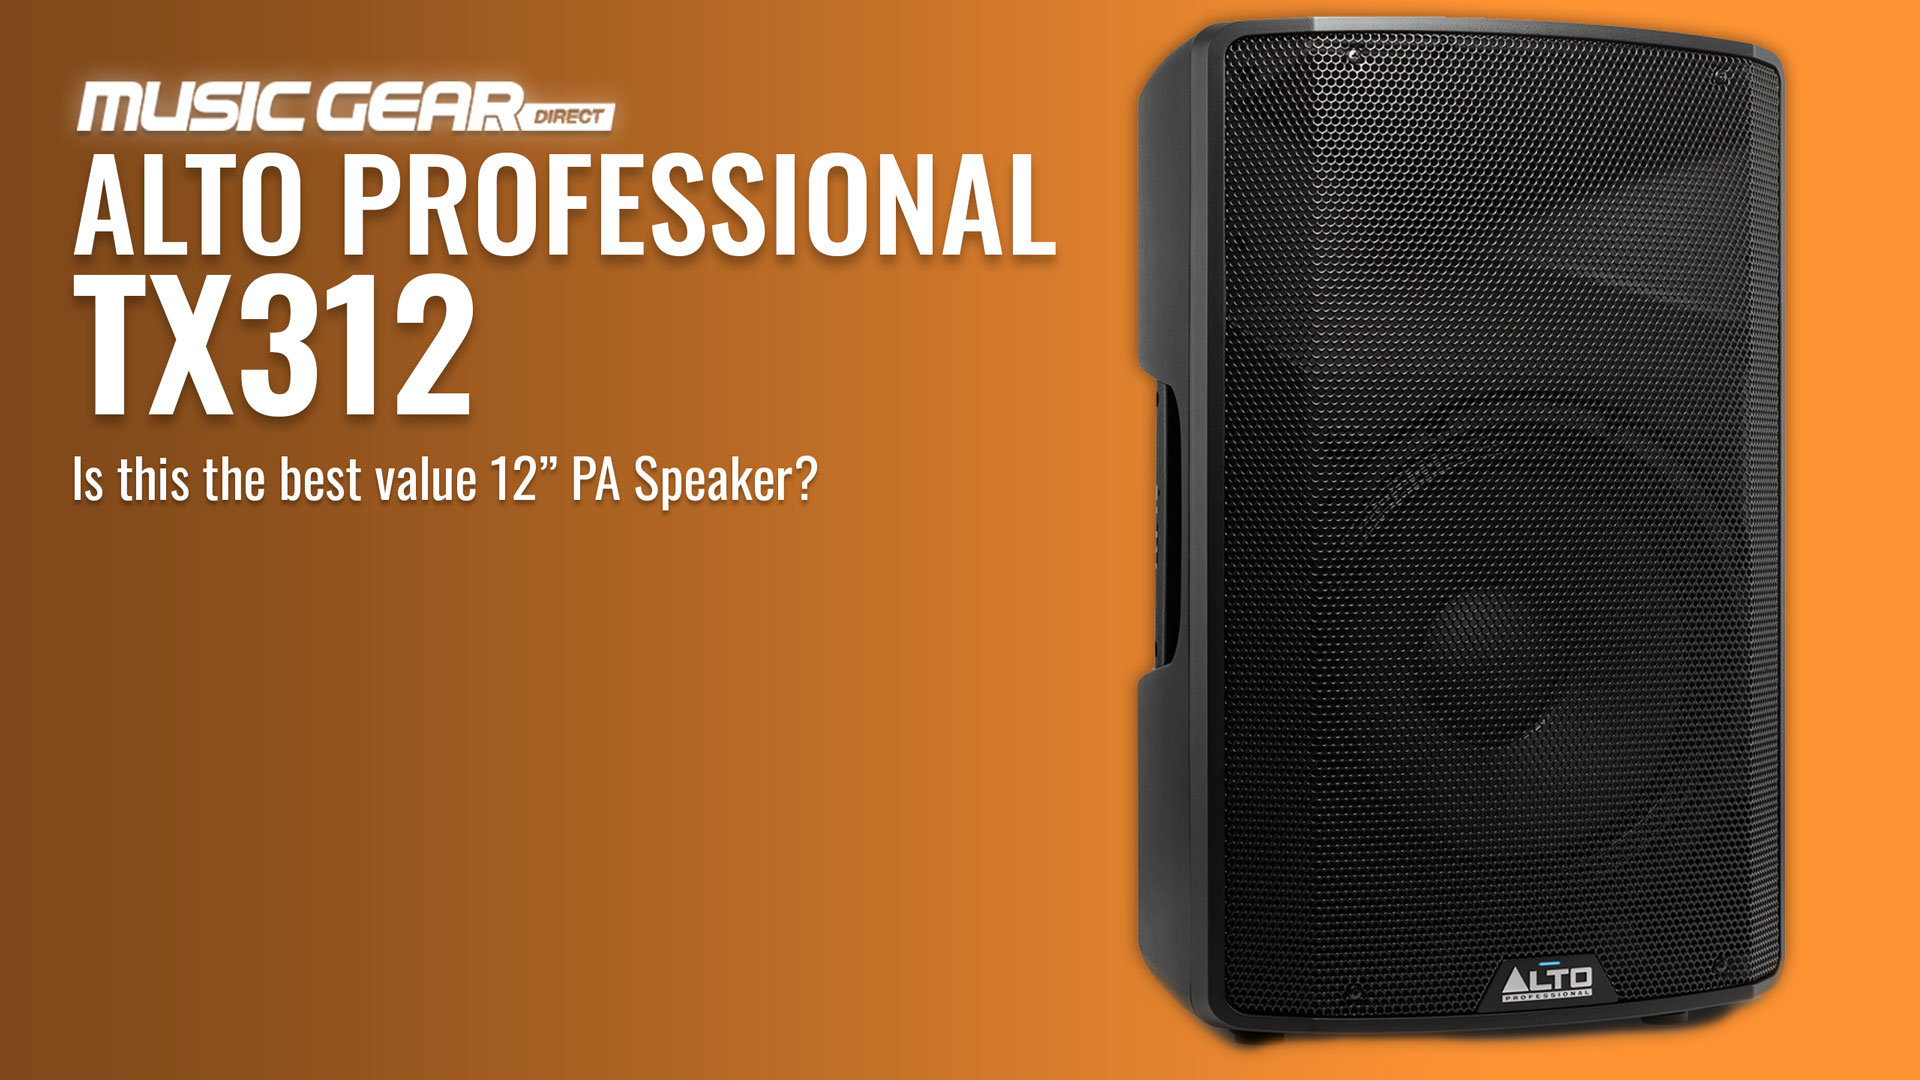 Alto Professional TX312 Overview